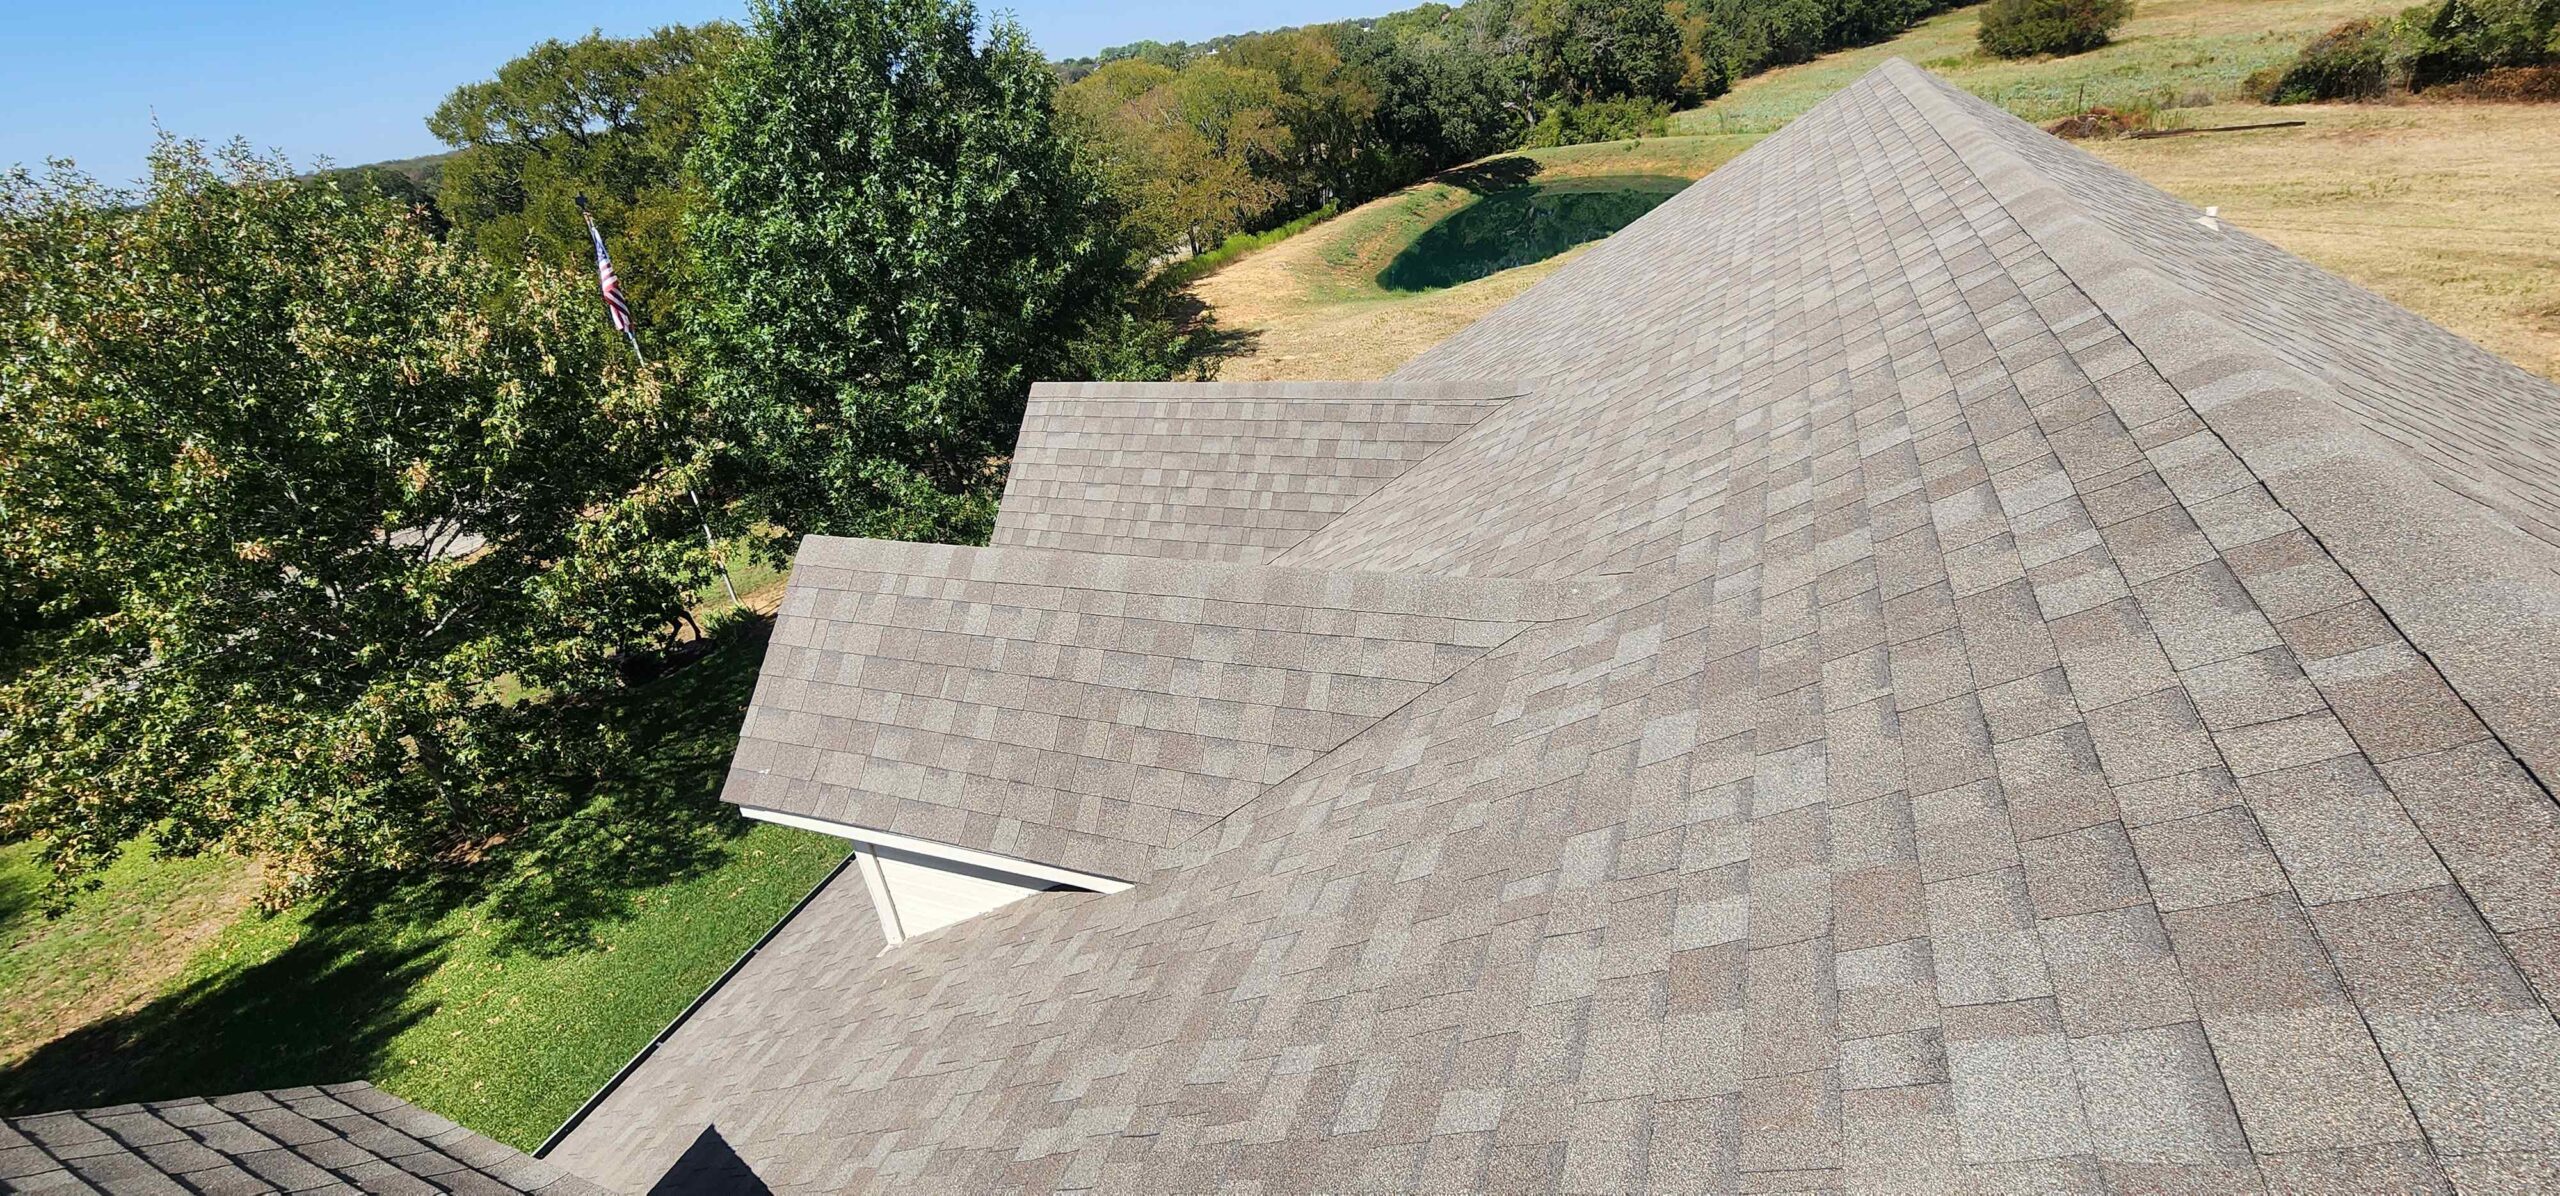 Residential roofing in Dallas/Fort Worth